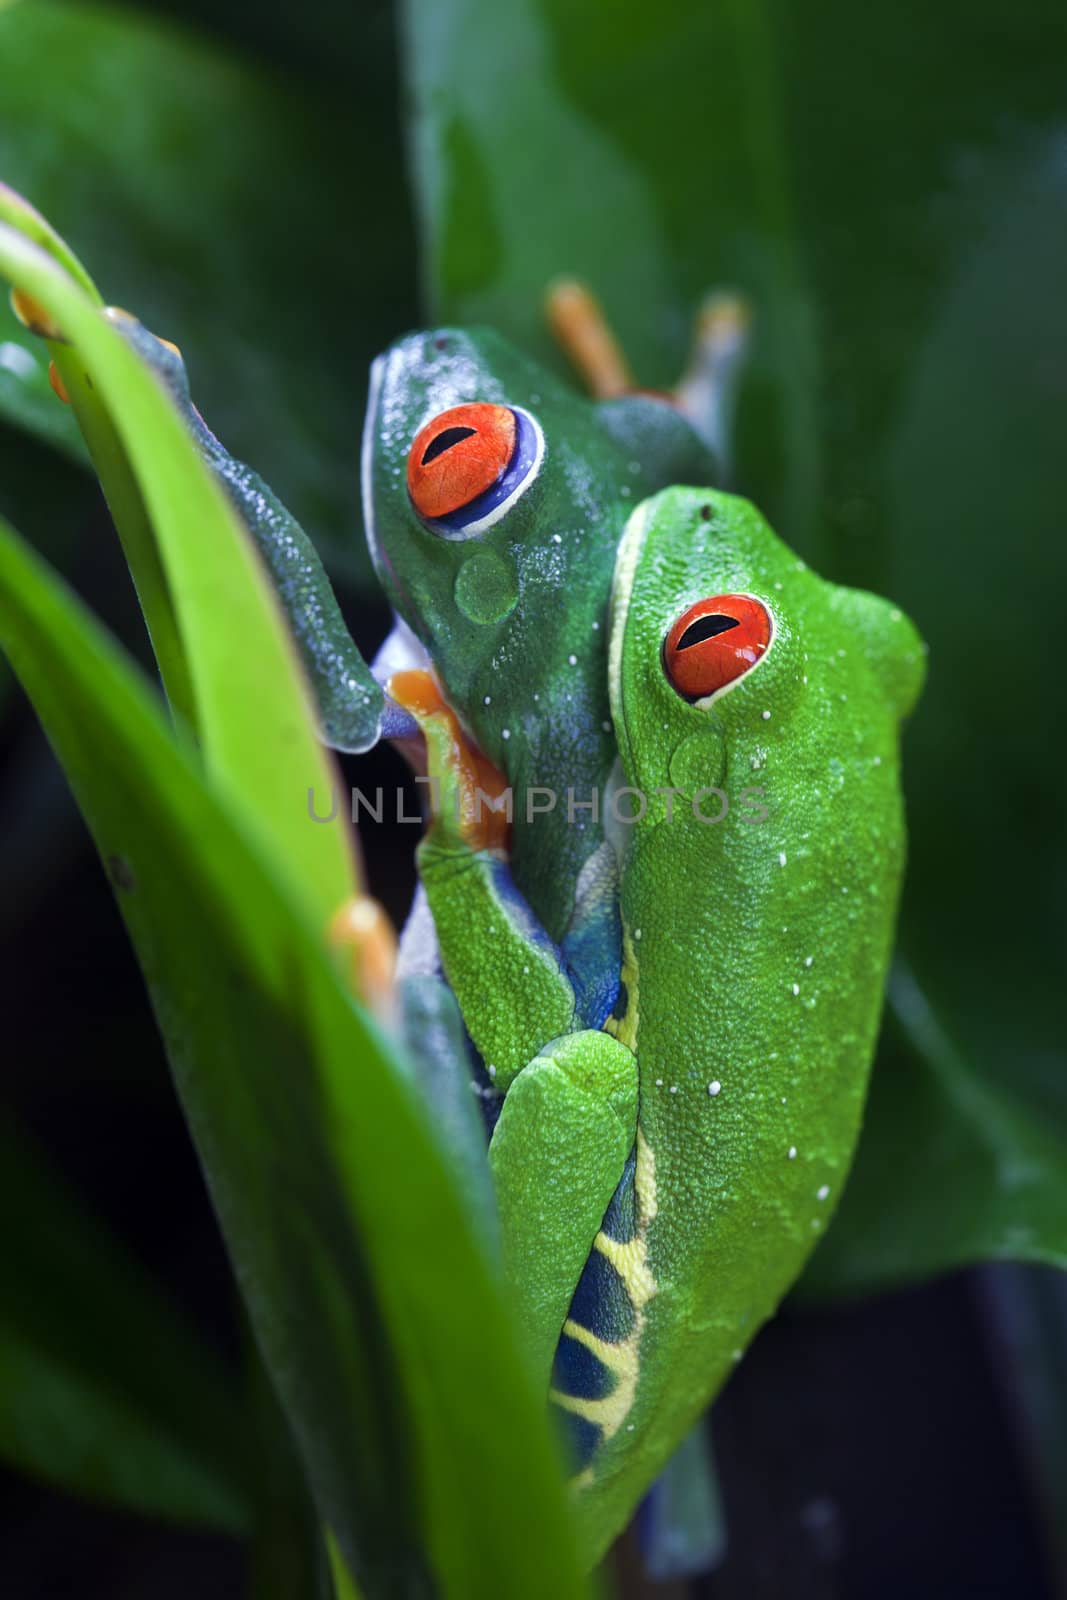 A close up shot of a mating pair of Red Eyed Tree Frogs Agalychnis callidryas in the jungle.